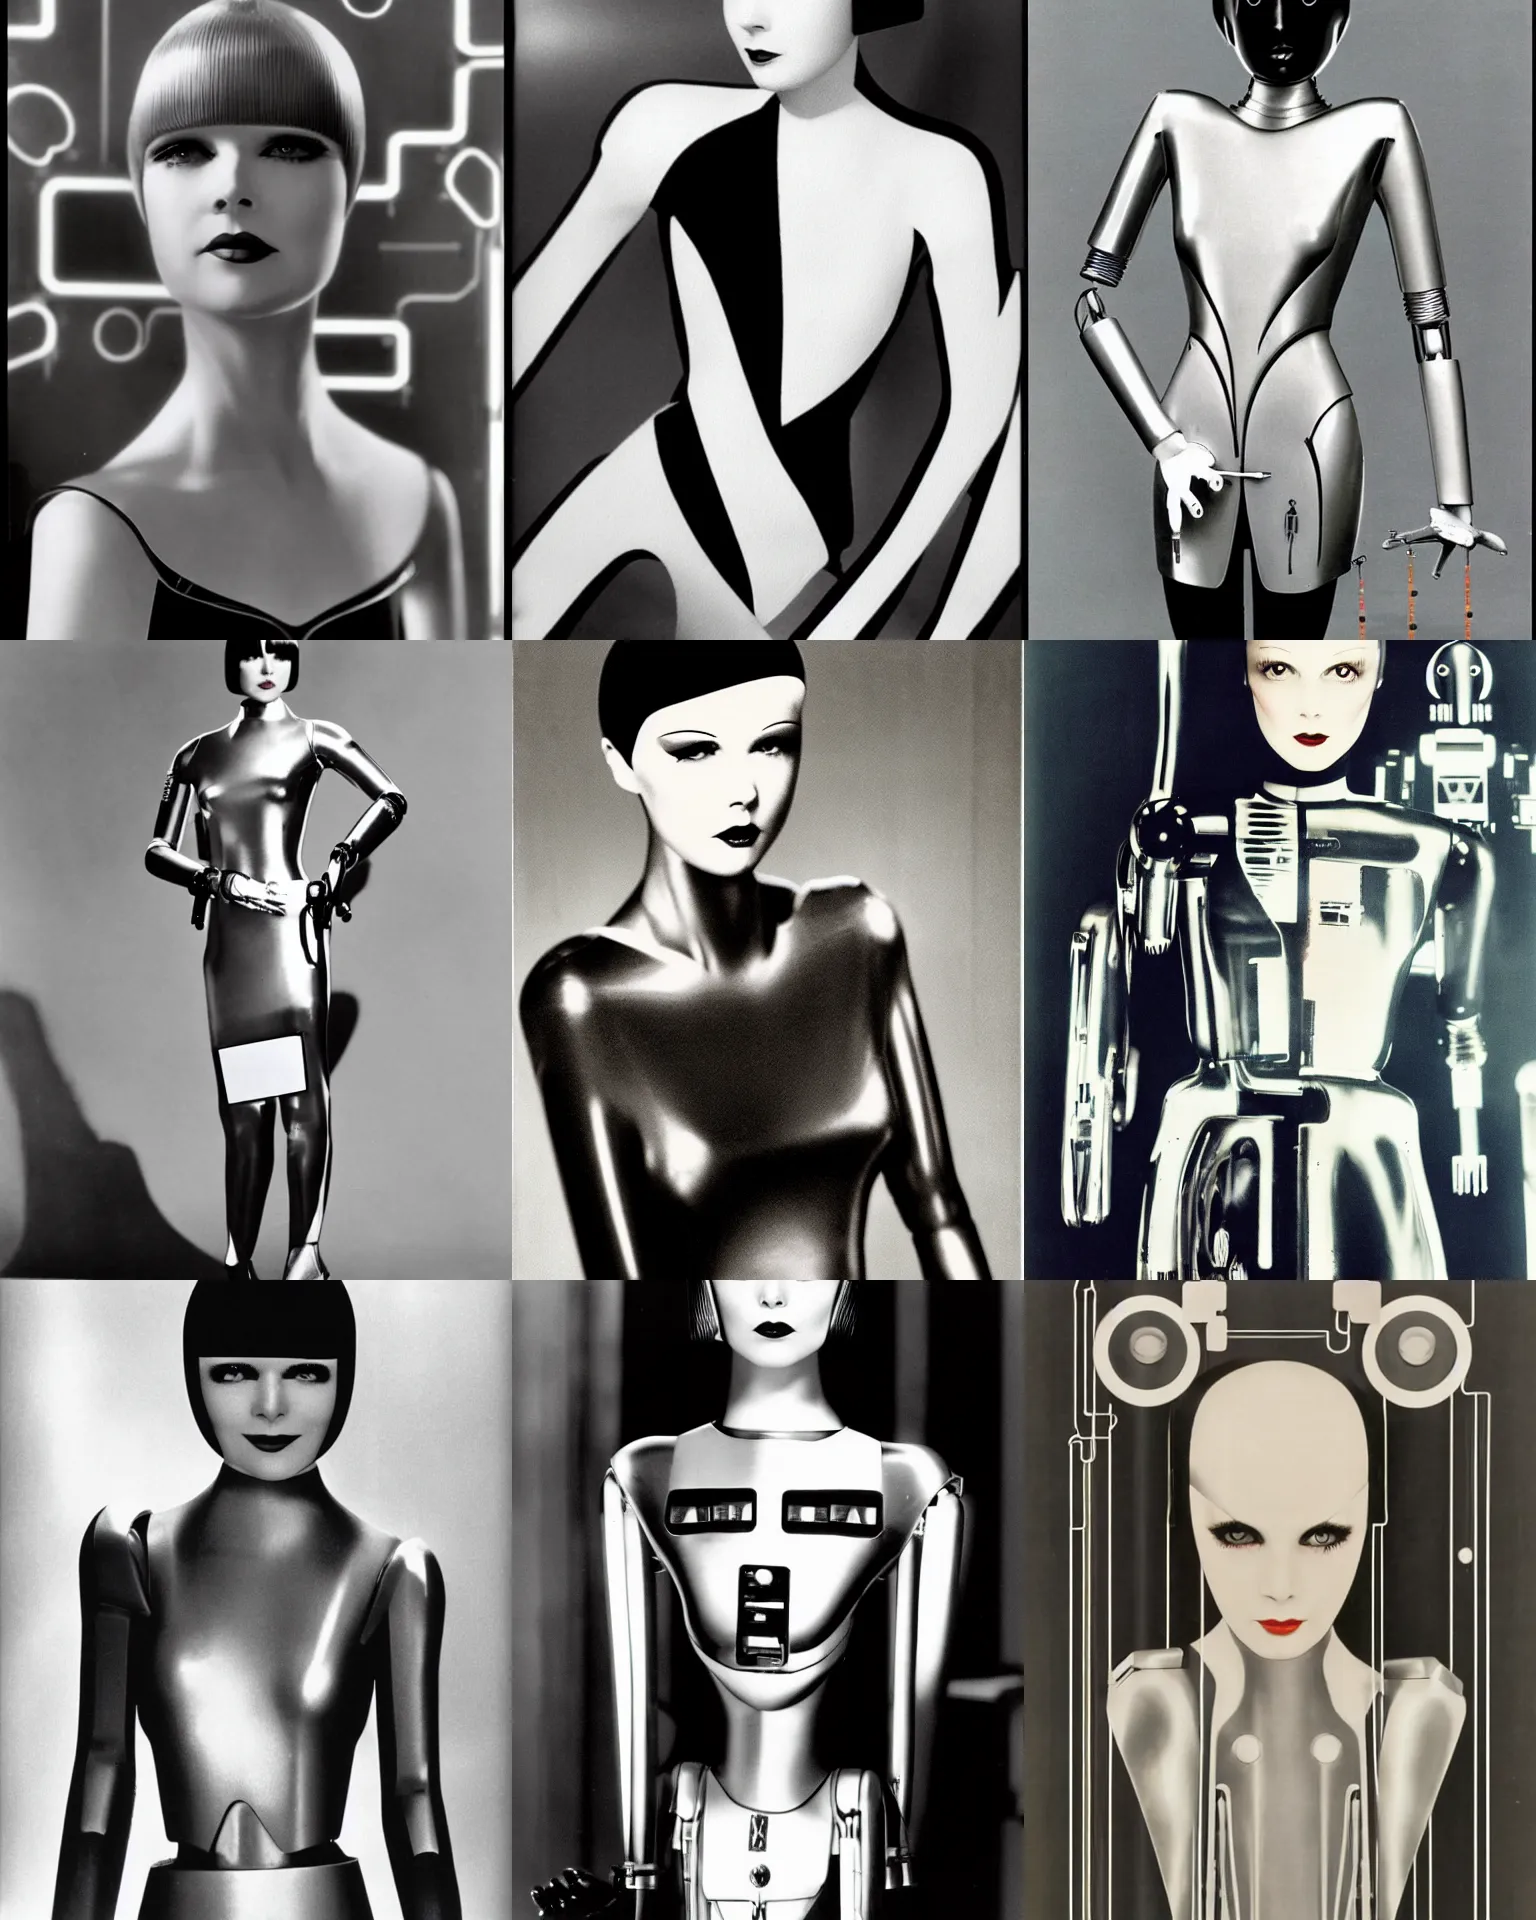 Prompt: mary louise brooks is half robot, chrome skin, robot arm, 1 9 8 0 s airbrush, clean lines, futuristic, blade runner eyes, dress made with circuit board